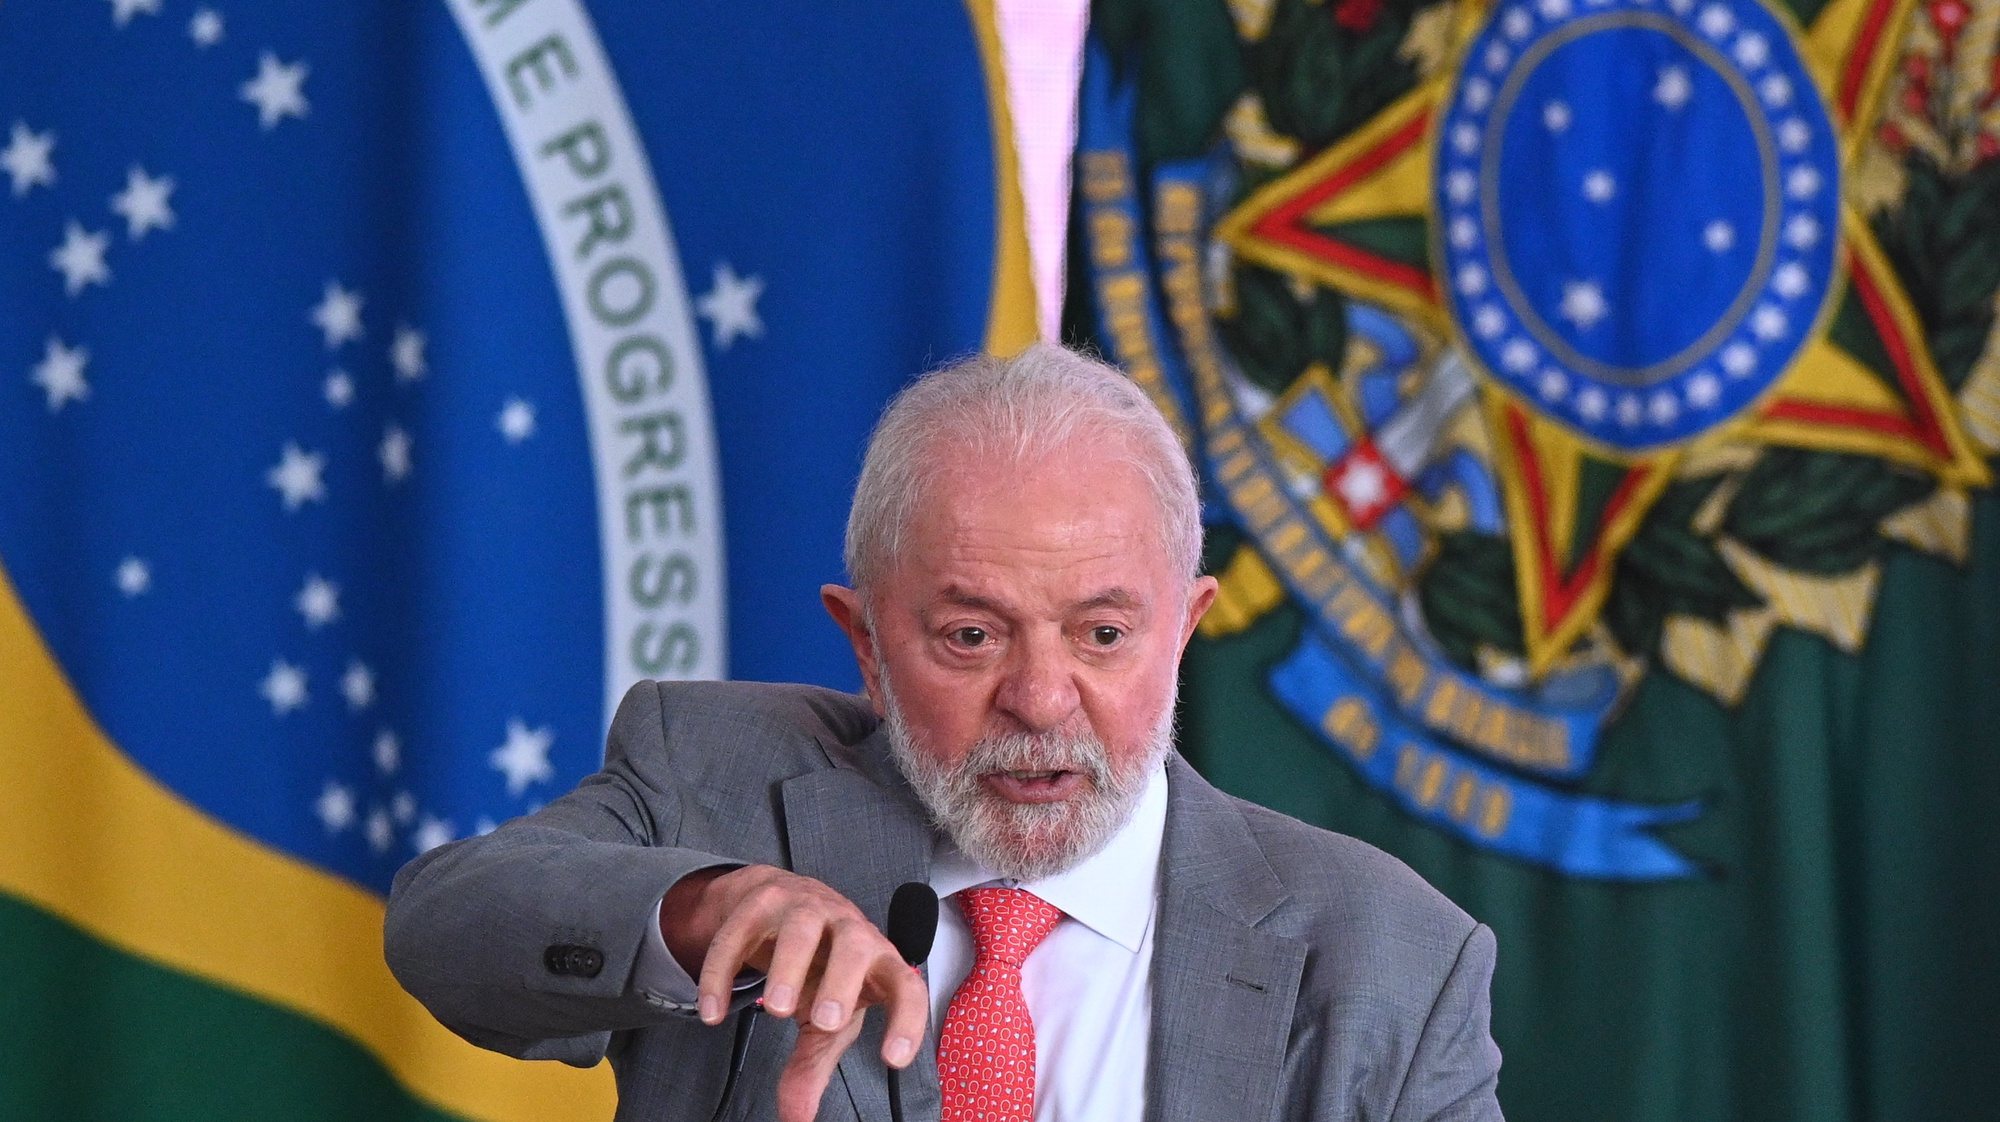 epa11023304 President of Brazil, Luiz InAcio Lula da Silva, speaks during the launch of the National Visible Streets Plan, a program to care for the homeless population, at the Palace of Planalto in Brasilia, Brazil, 11 December 2023. Lula da Silva received dozens of homeless people at the government headquarters and announced a vast support plan for those he defined as &quot;the most suffering people&quot; in society.  EPA/Andre Borges